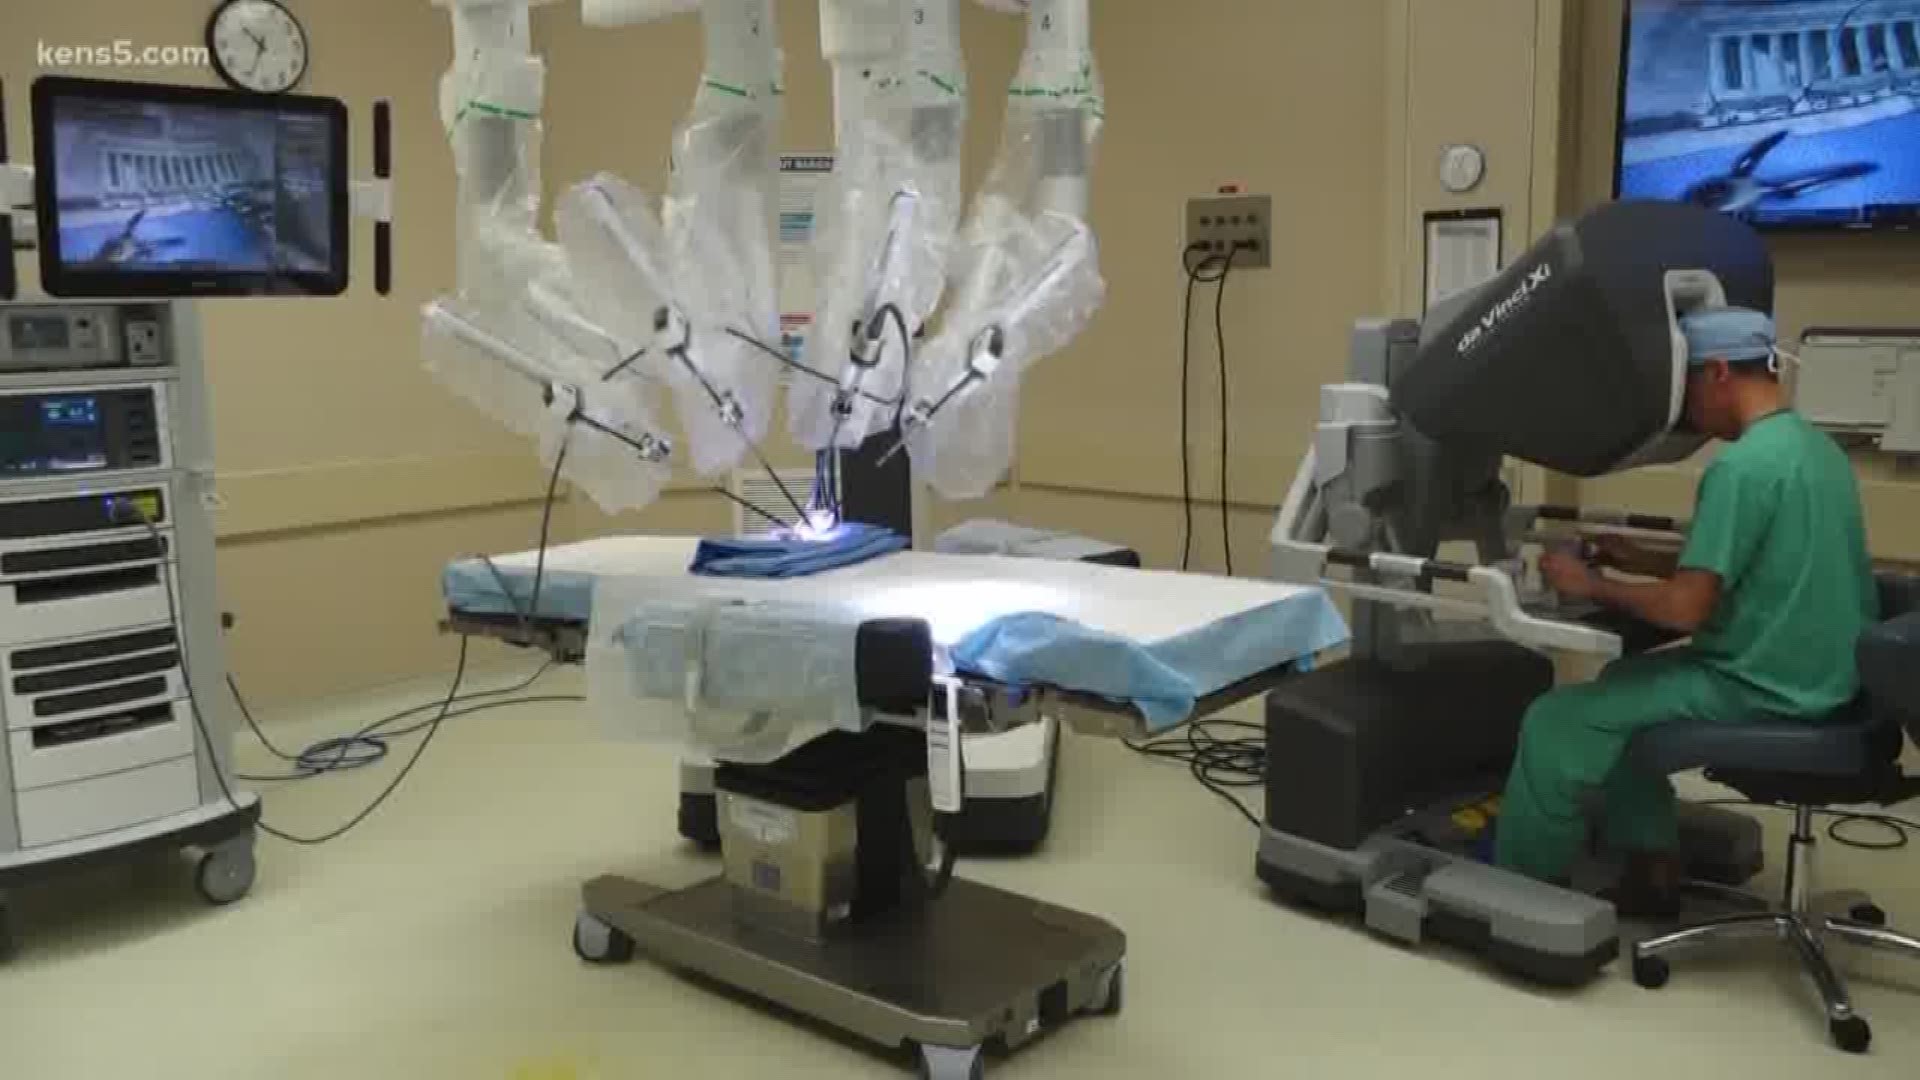 St. Luke's Baptist Hospital is now ranked among the top 50 hospitals across the U.S. to perform robotic surgeries.